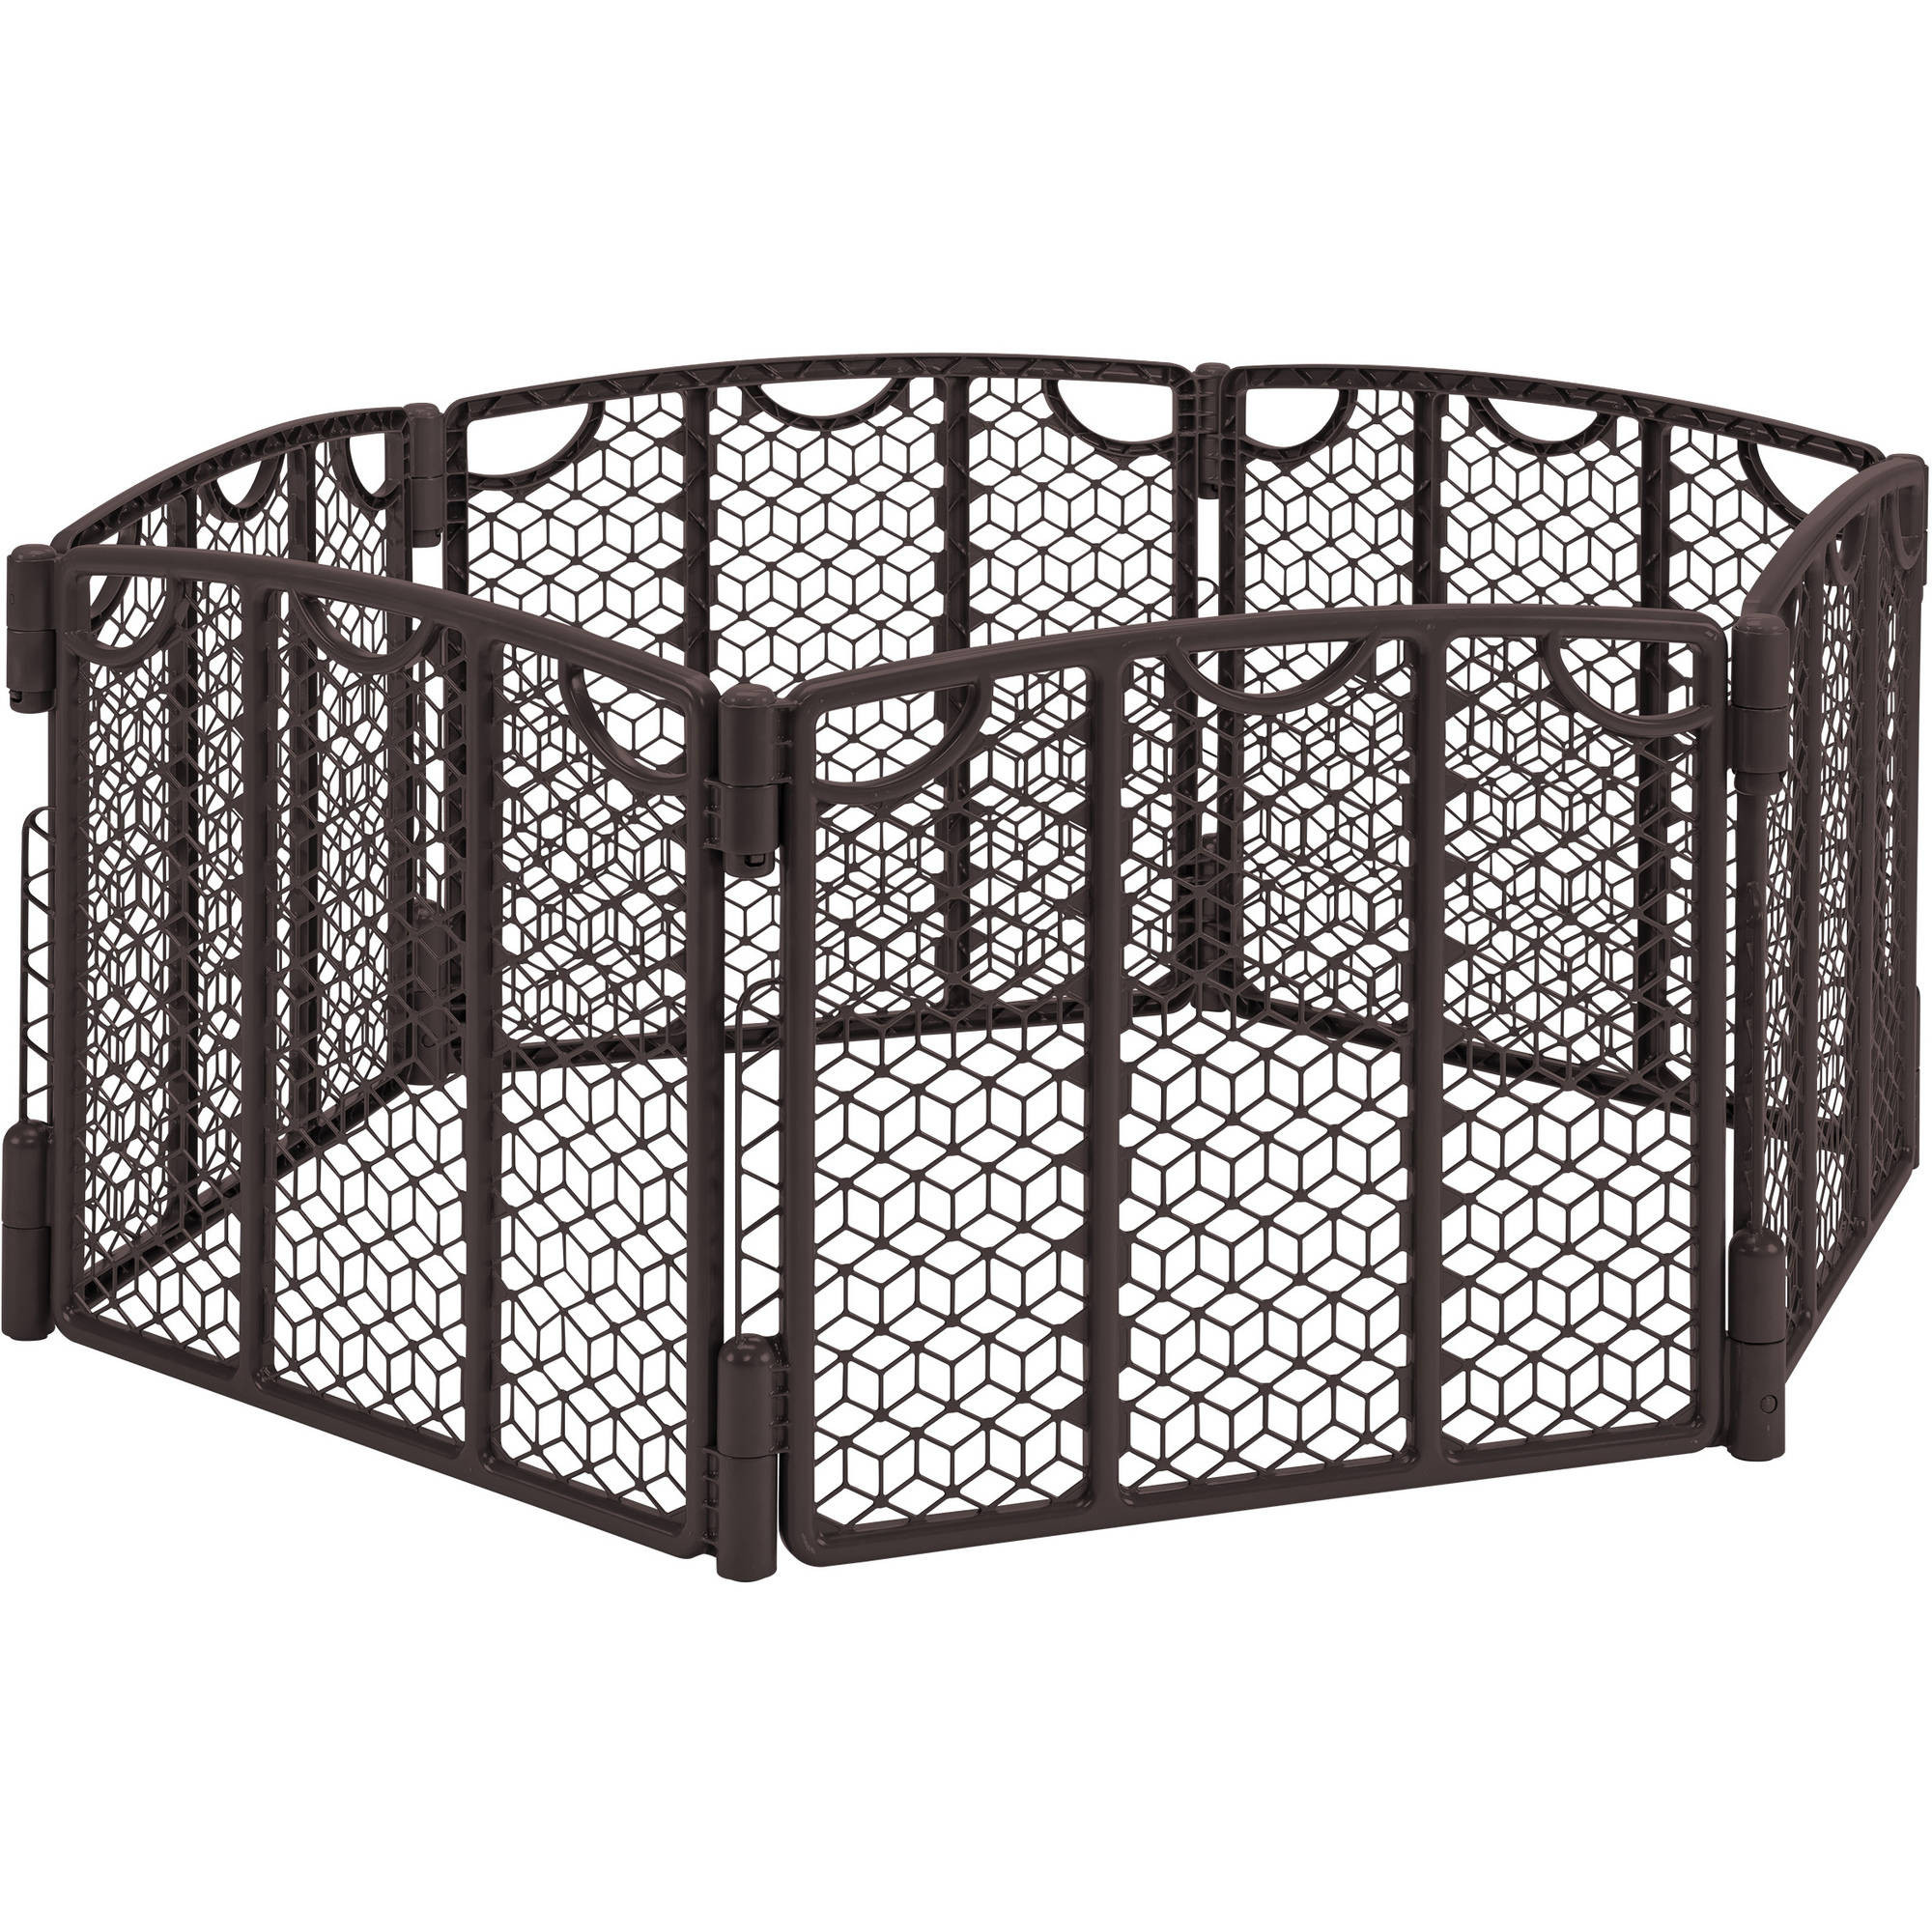 Best ideas about Target Baby Gate
. Save or Pin Regalo 192 Inch Super Wide Configurable Baby Gate and 8 Now.